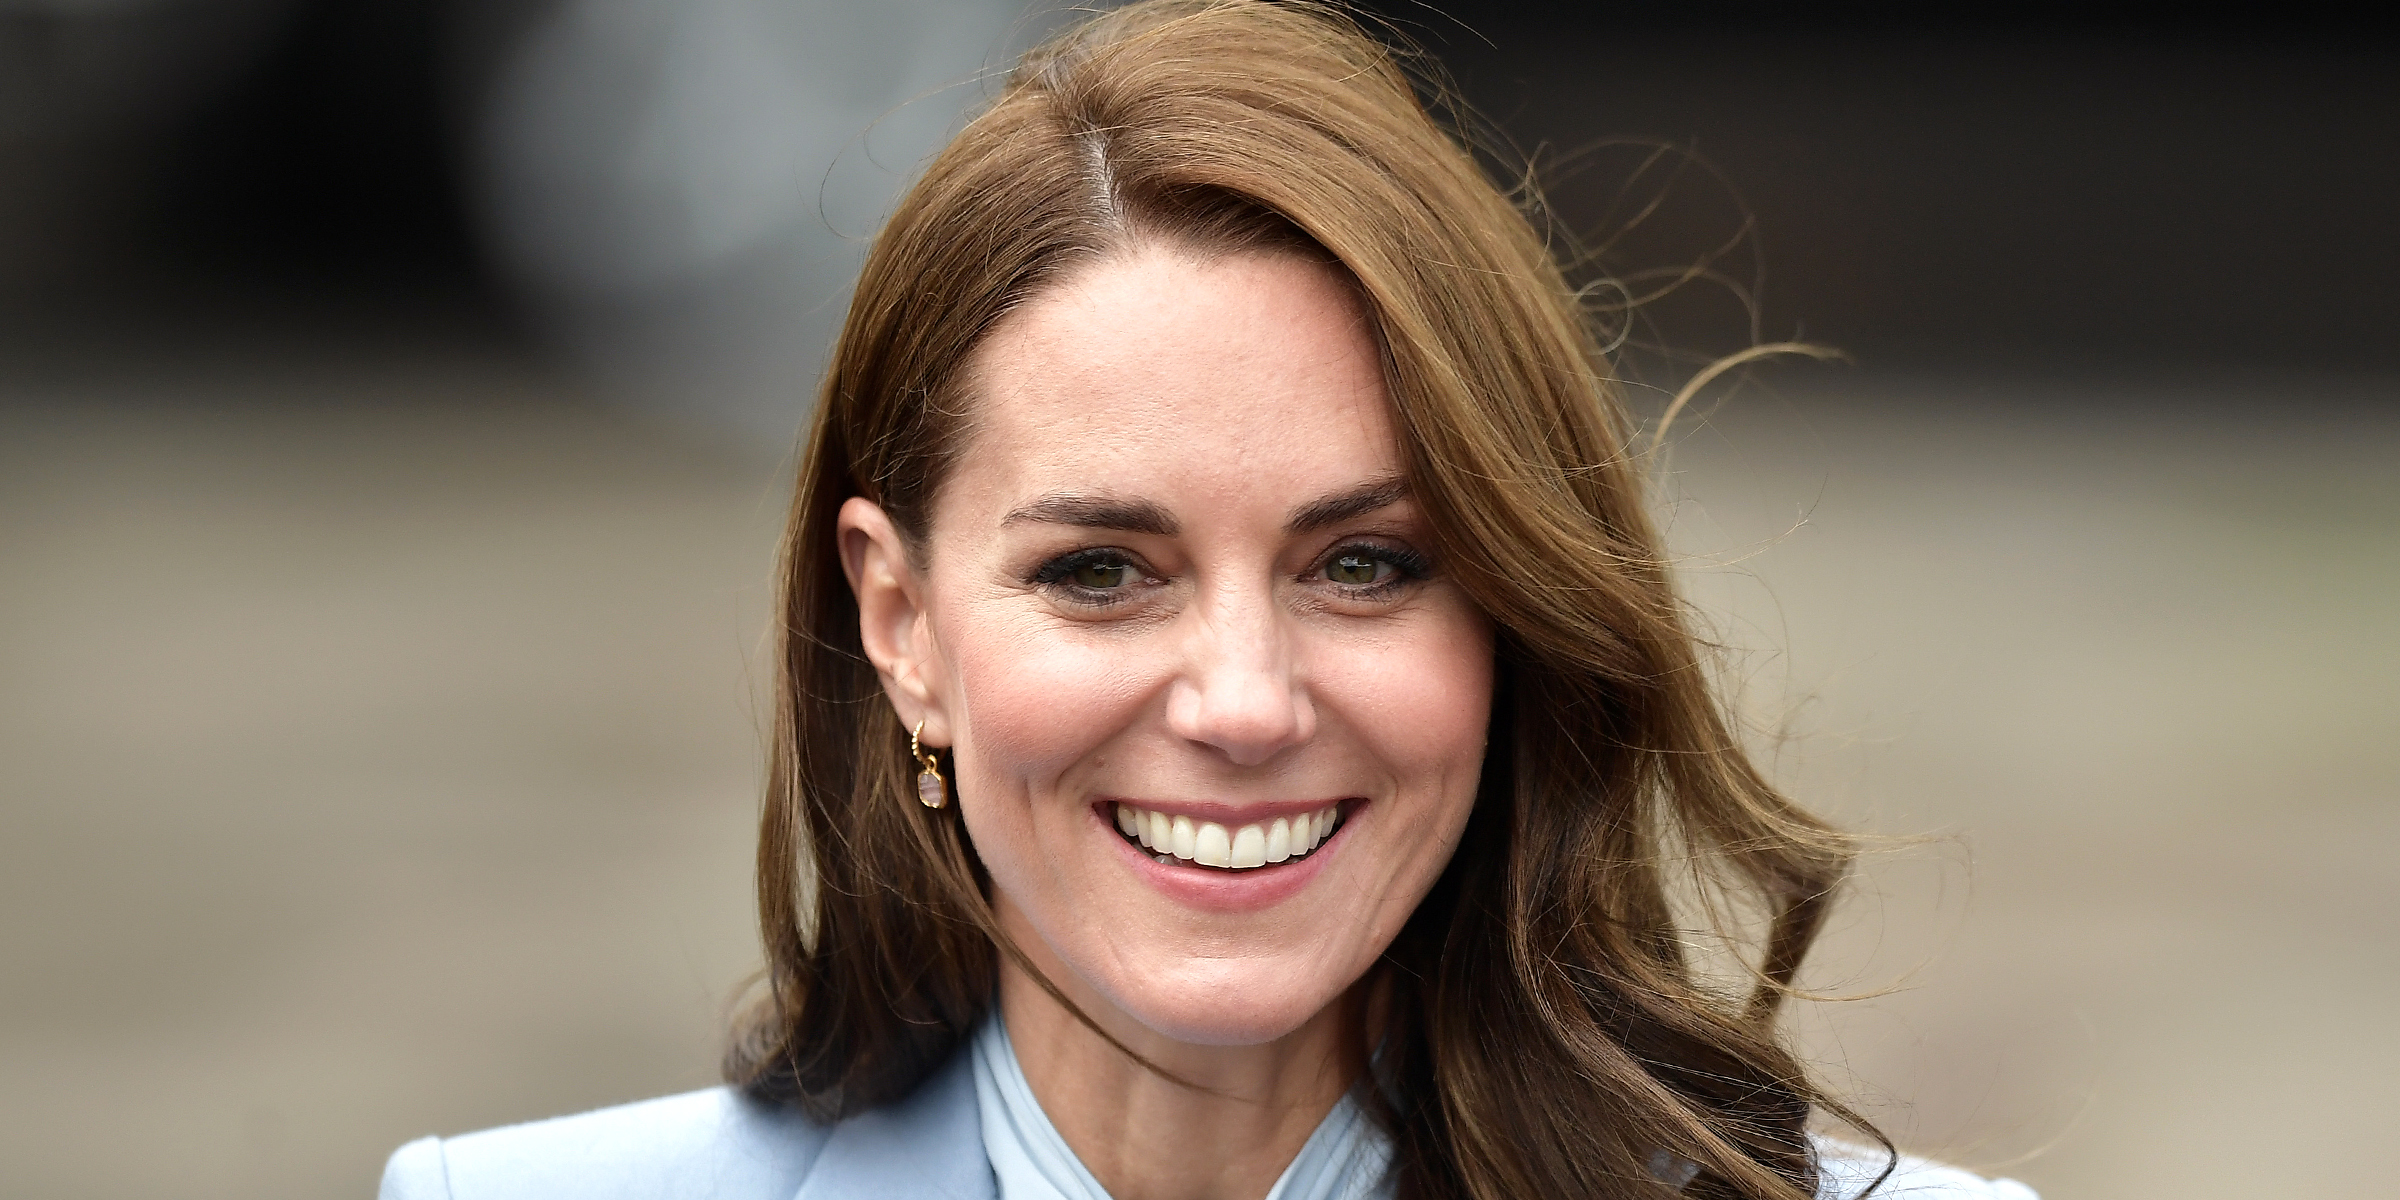 Princesse Catherine | Source : Getty Images